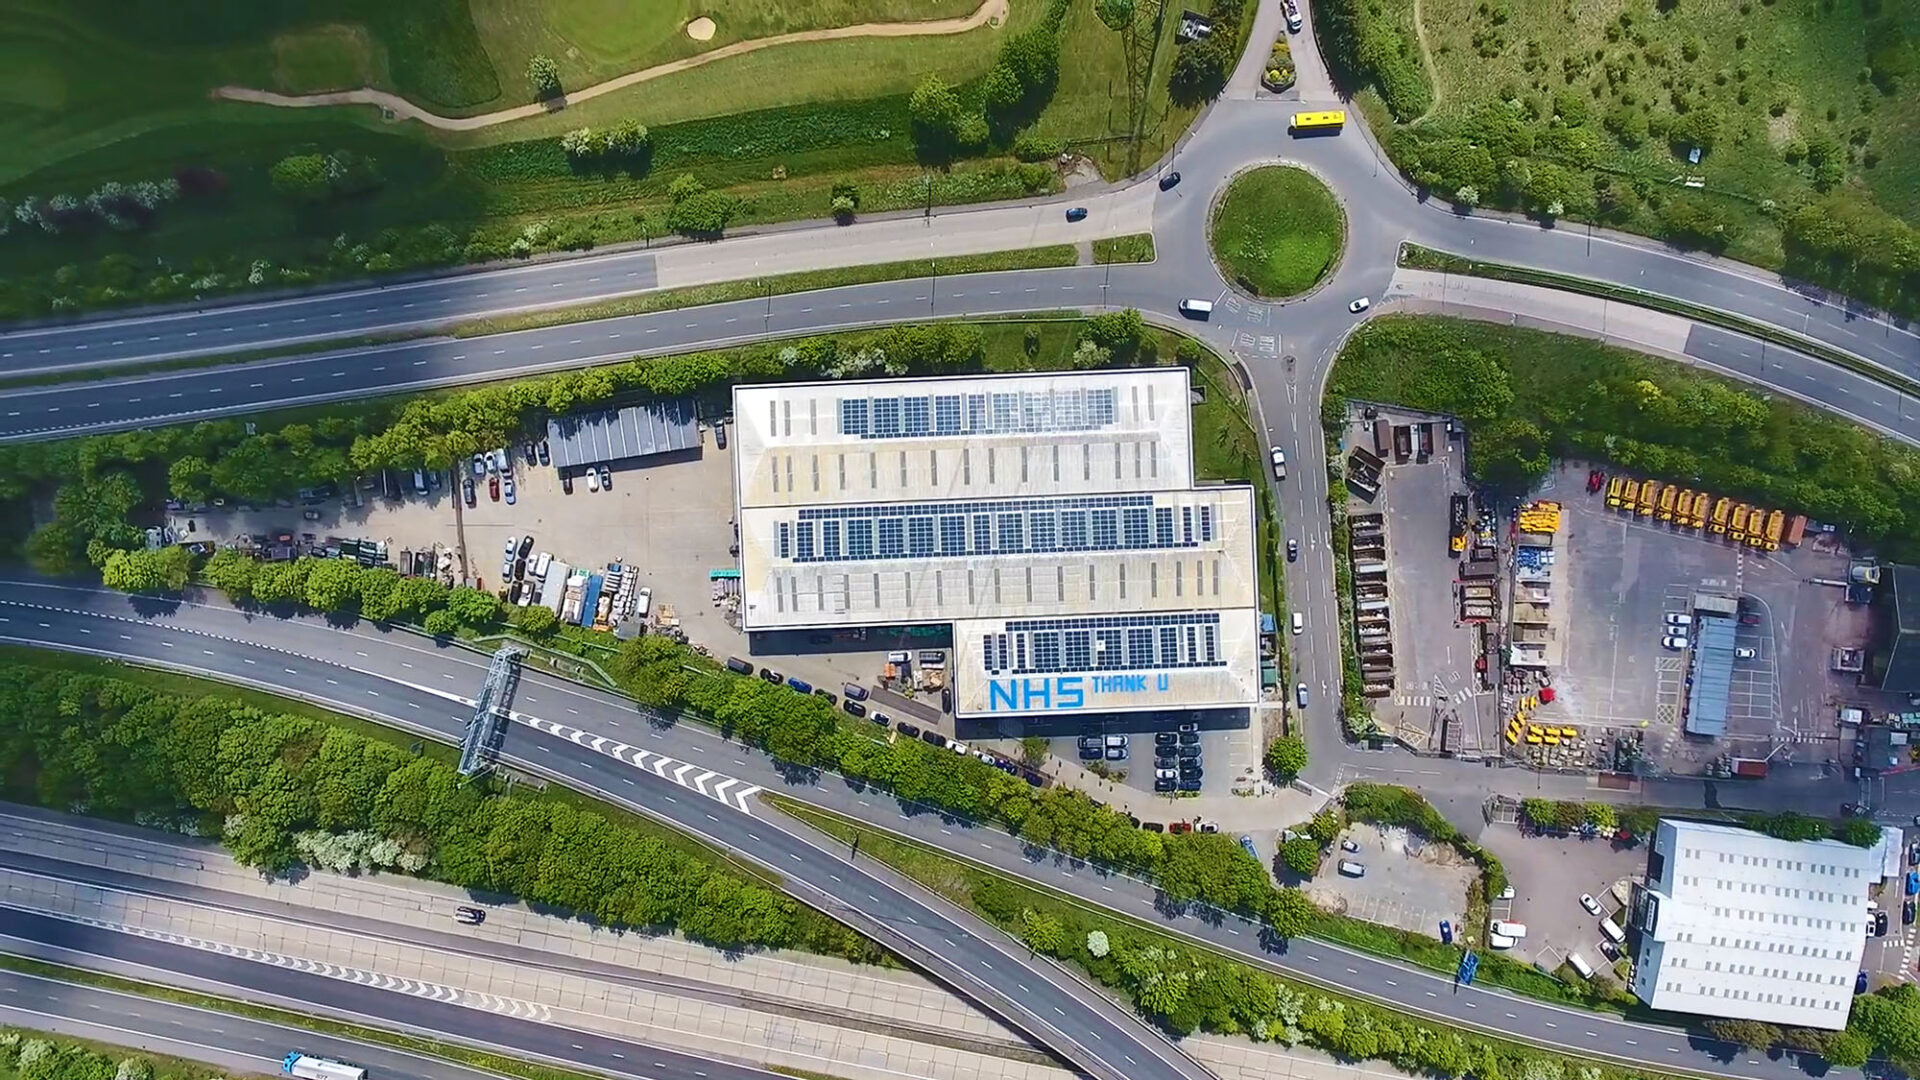 Aerial photo of solar panels on warehouse roof in between two roads